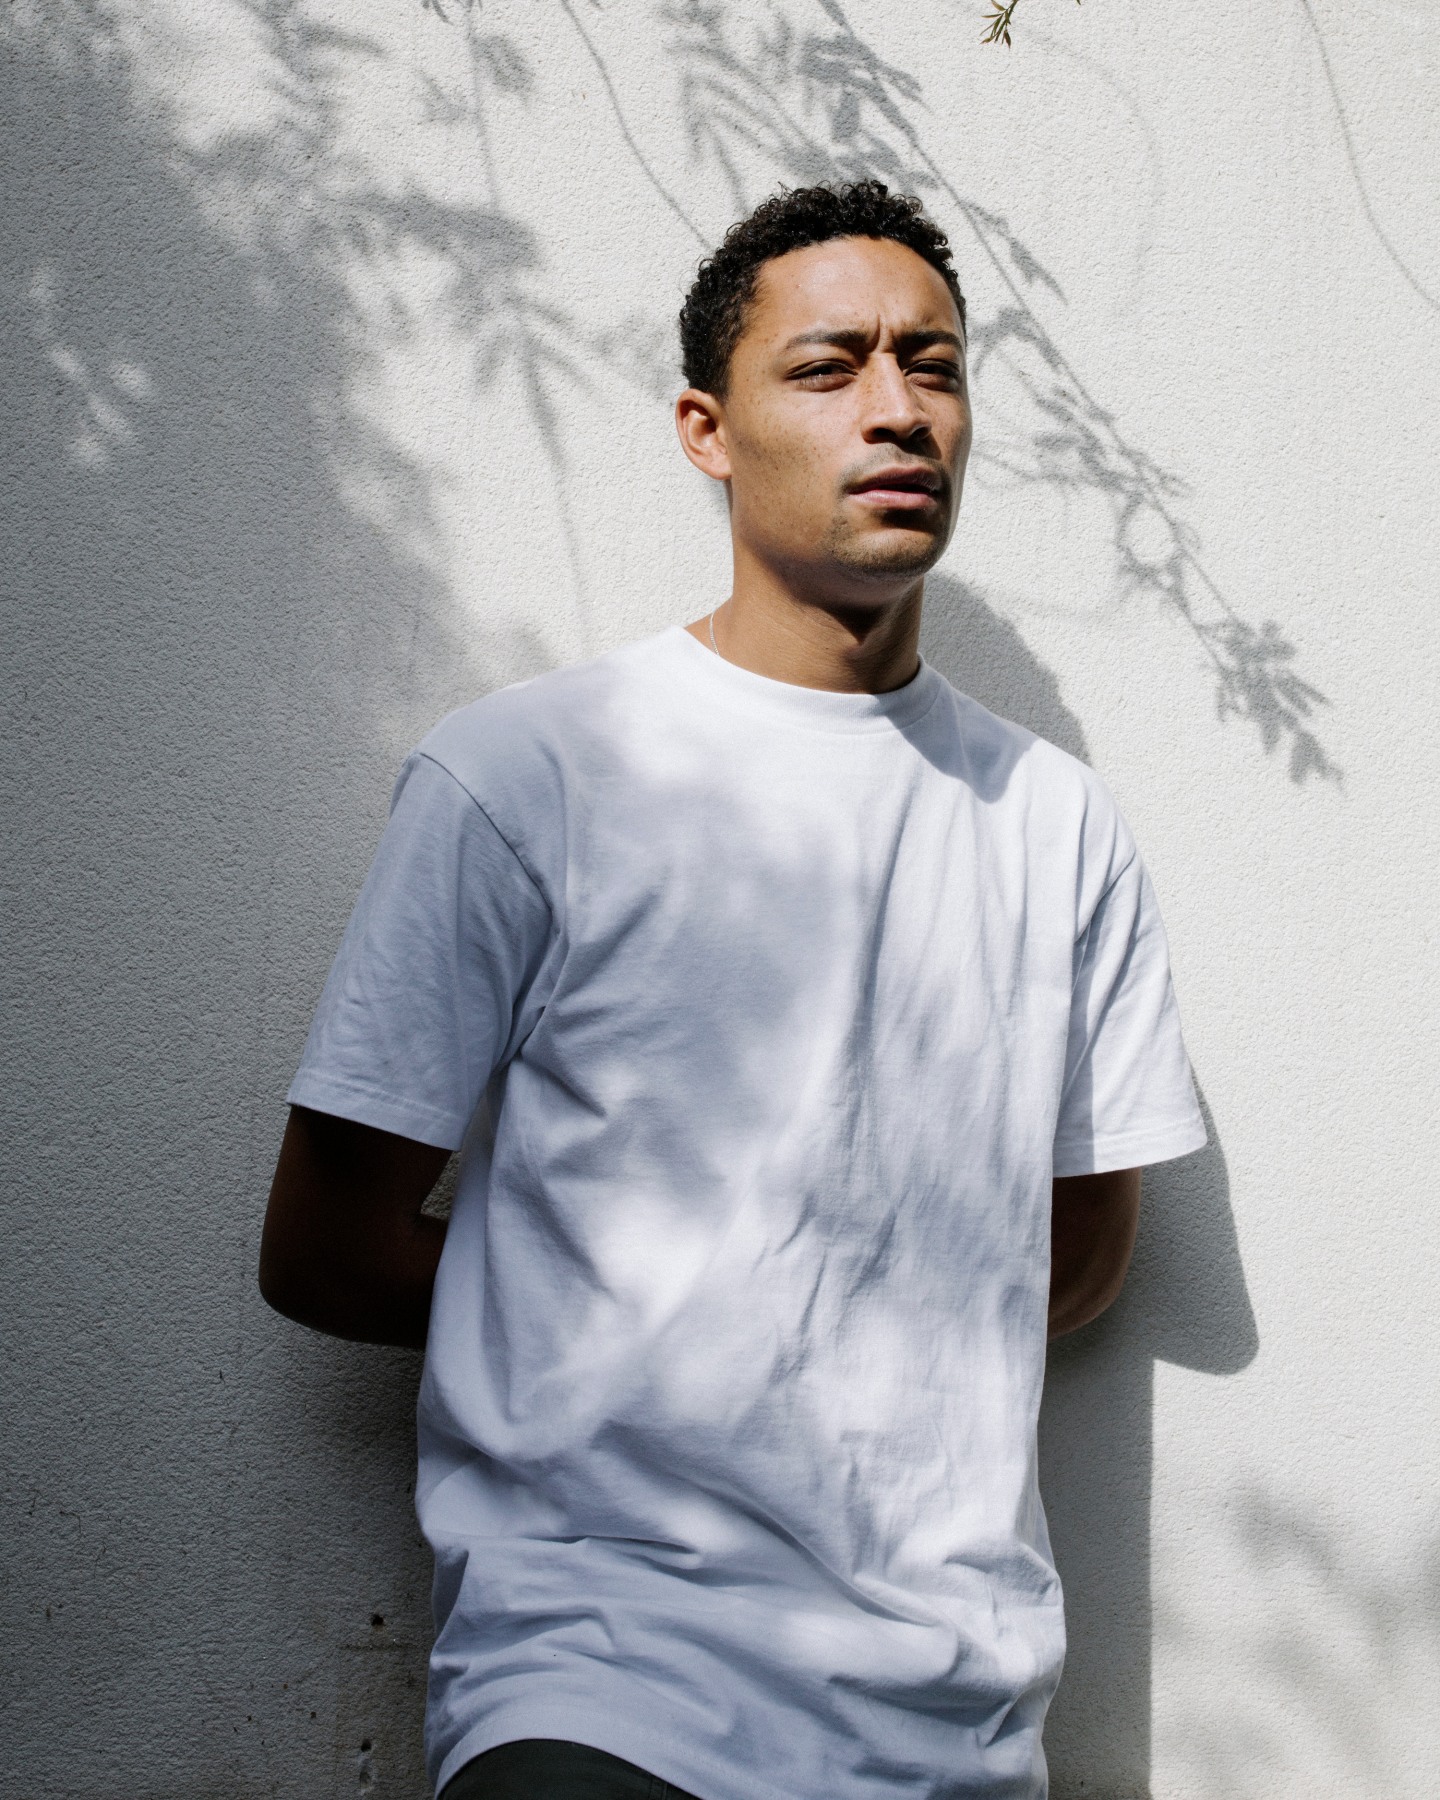 Loyle Carner just wants to talk